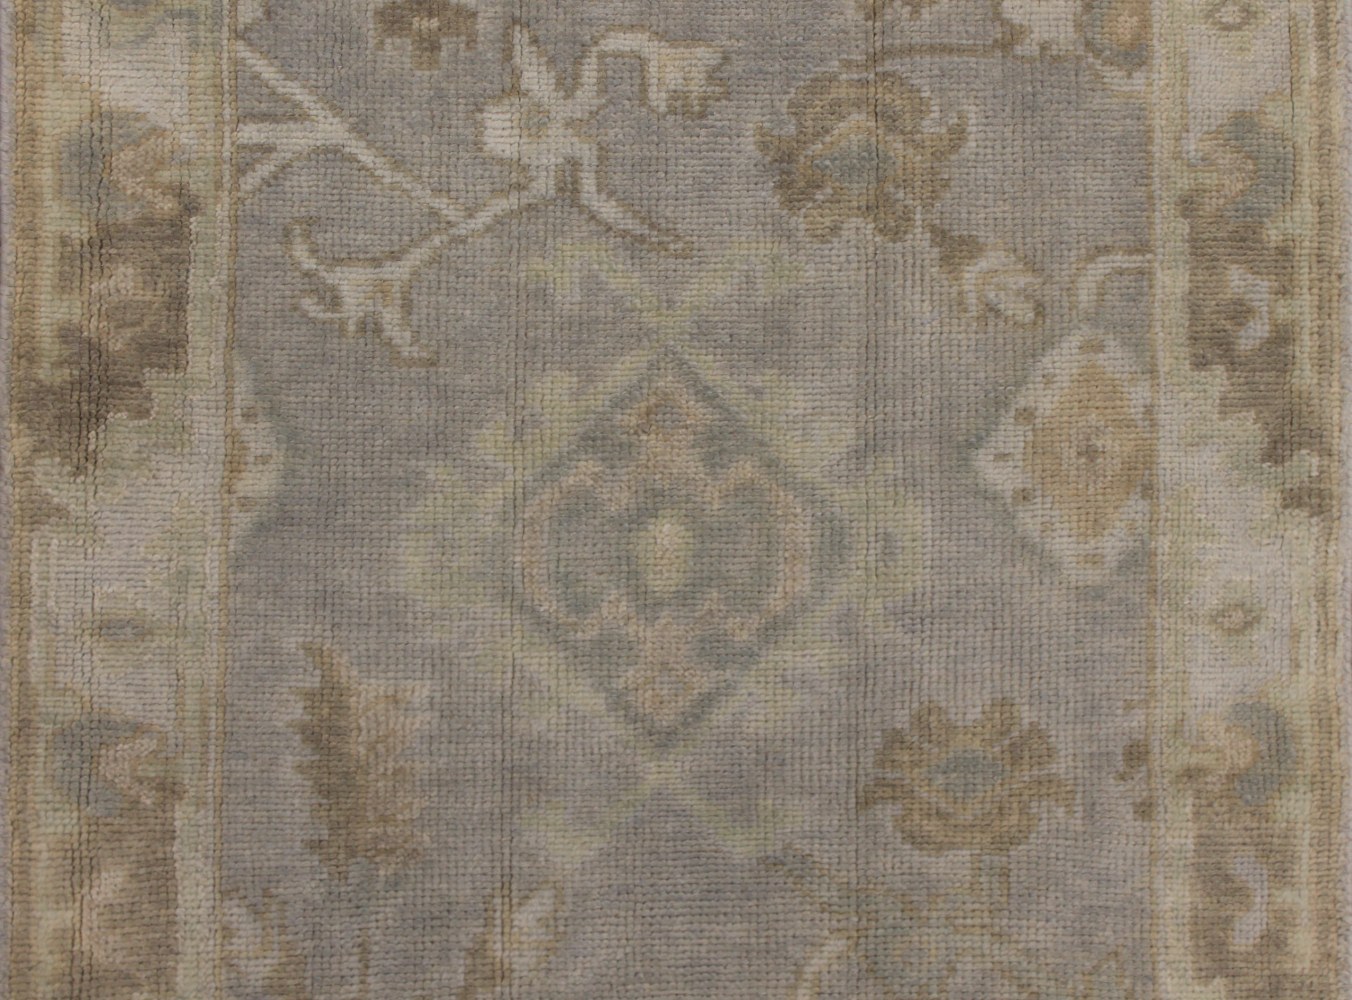 6 ft. Runner Oushak Hand Knotted Wool Area Rug - MR026023